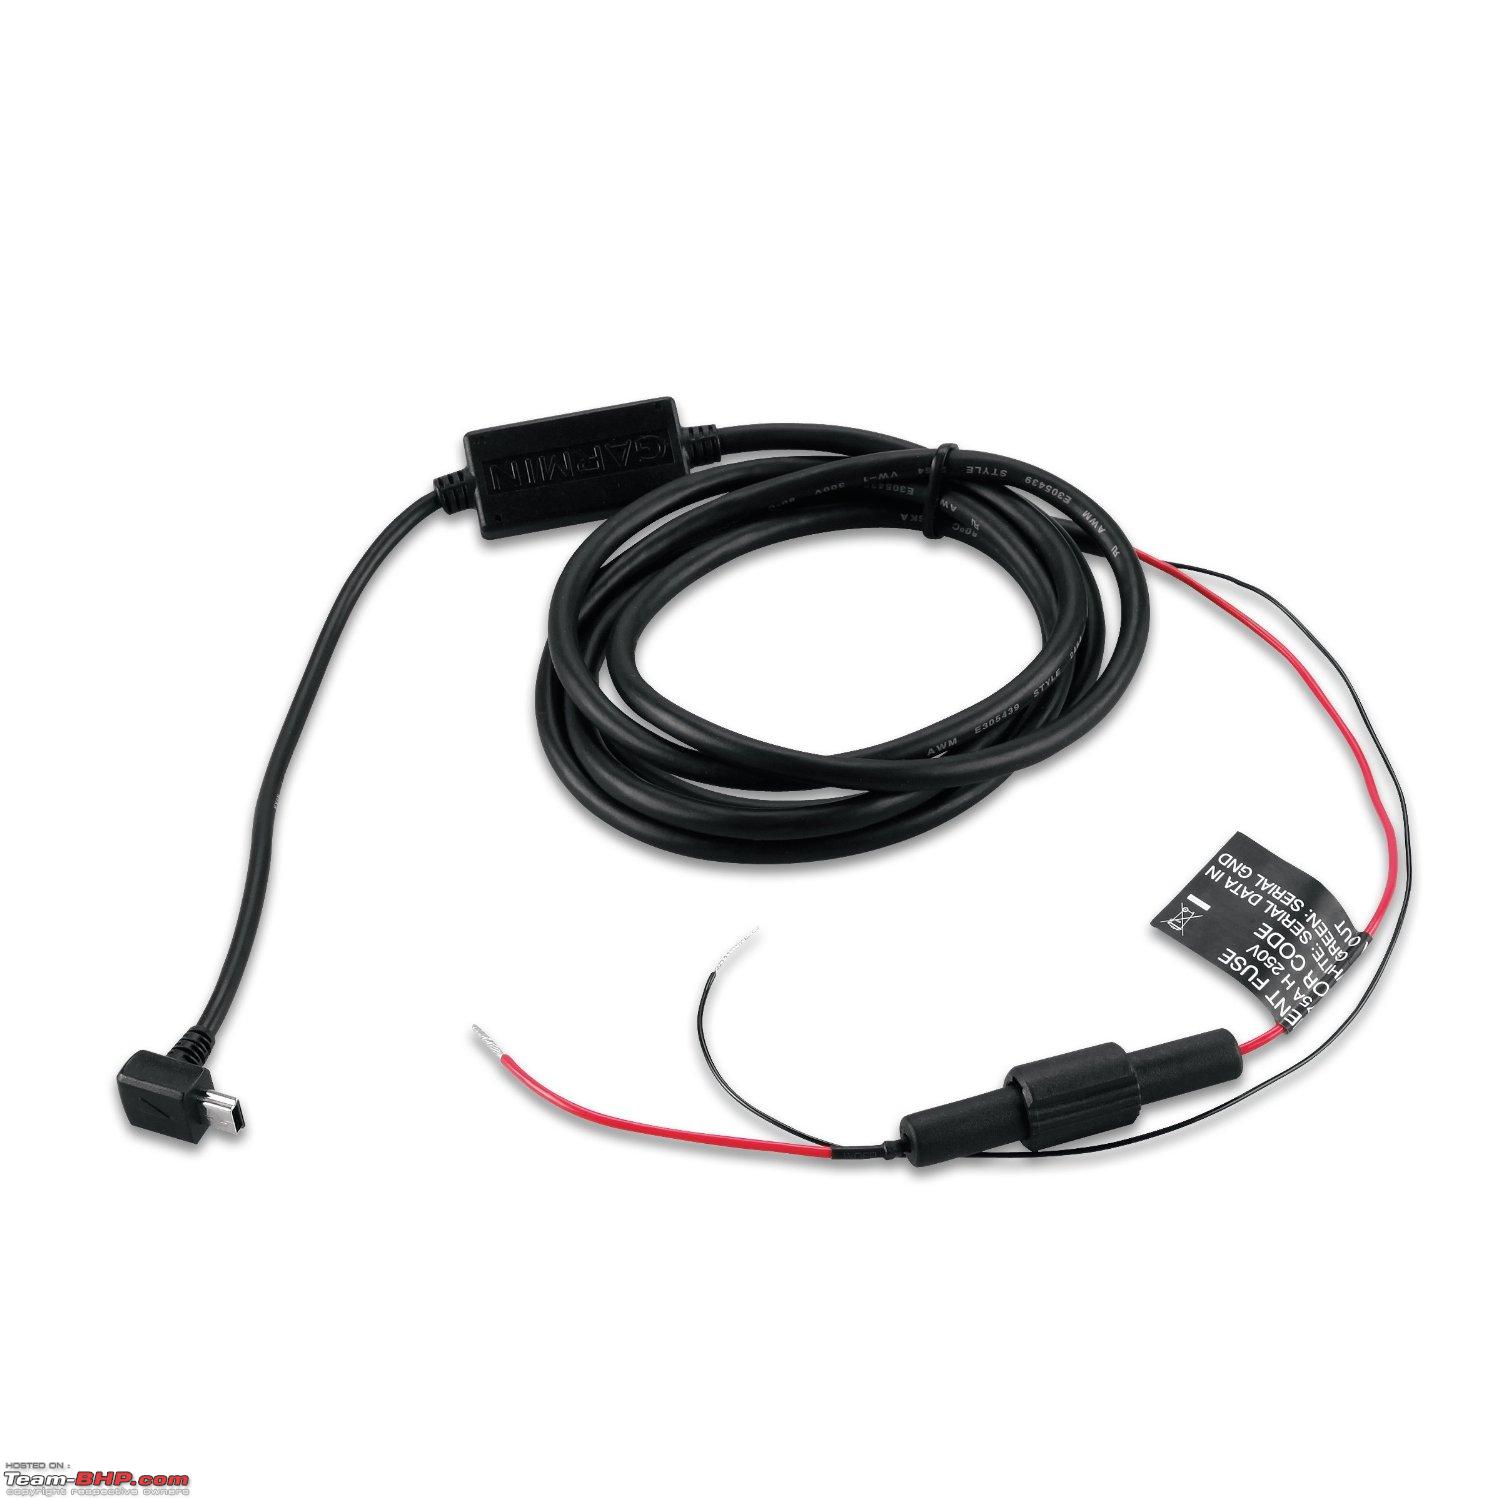 Mini USB Port REARMASTER Universal OBD Power Cable for Dash Camera,24 Hours Surveillance Acc Mode with Switch Button 